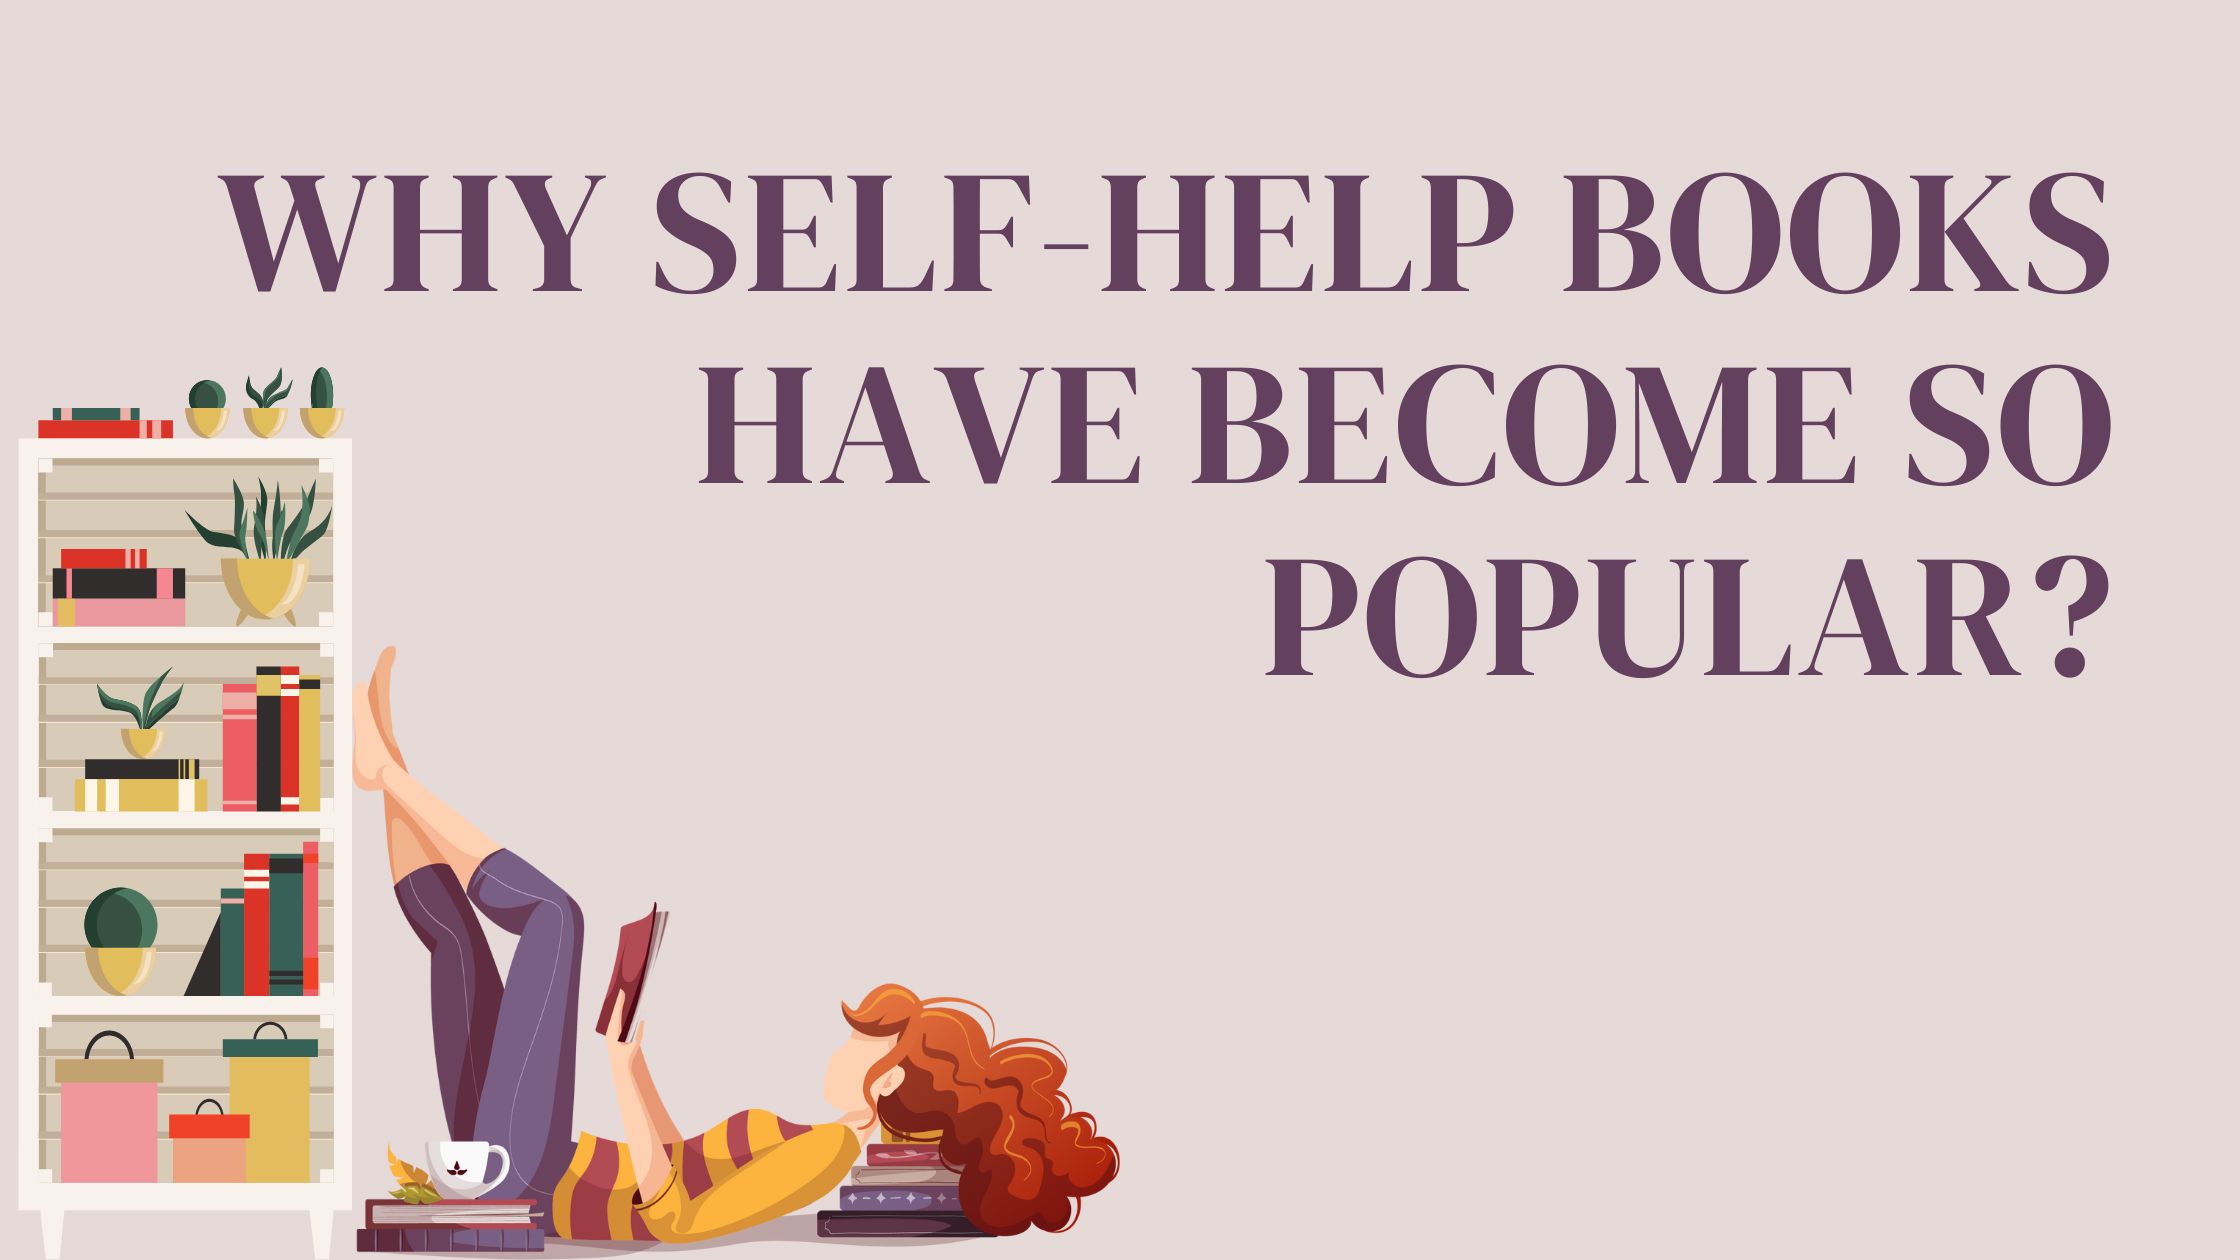 WHY SELF-HELP BOOKS HAVE BECOME SO POPULAR?